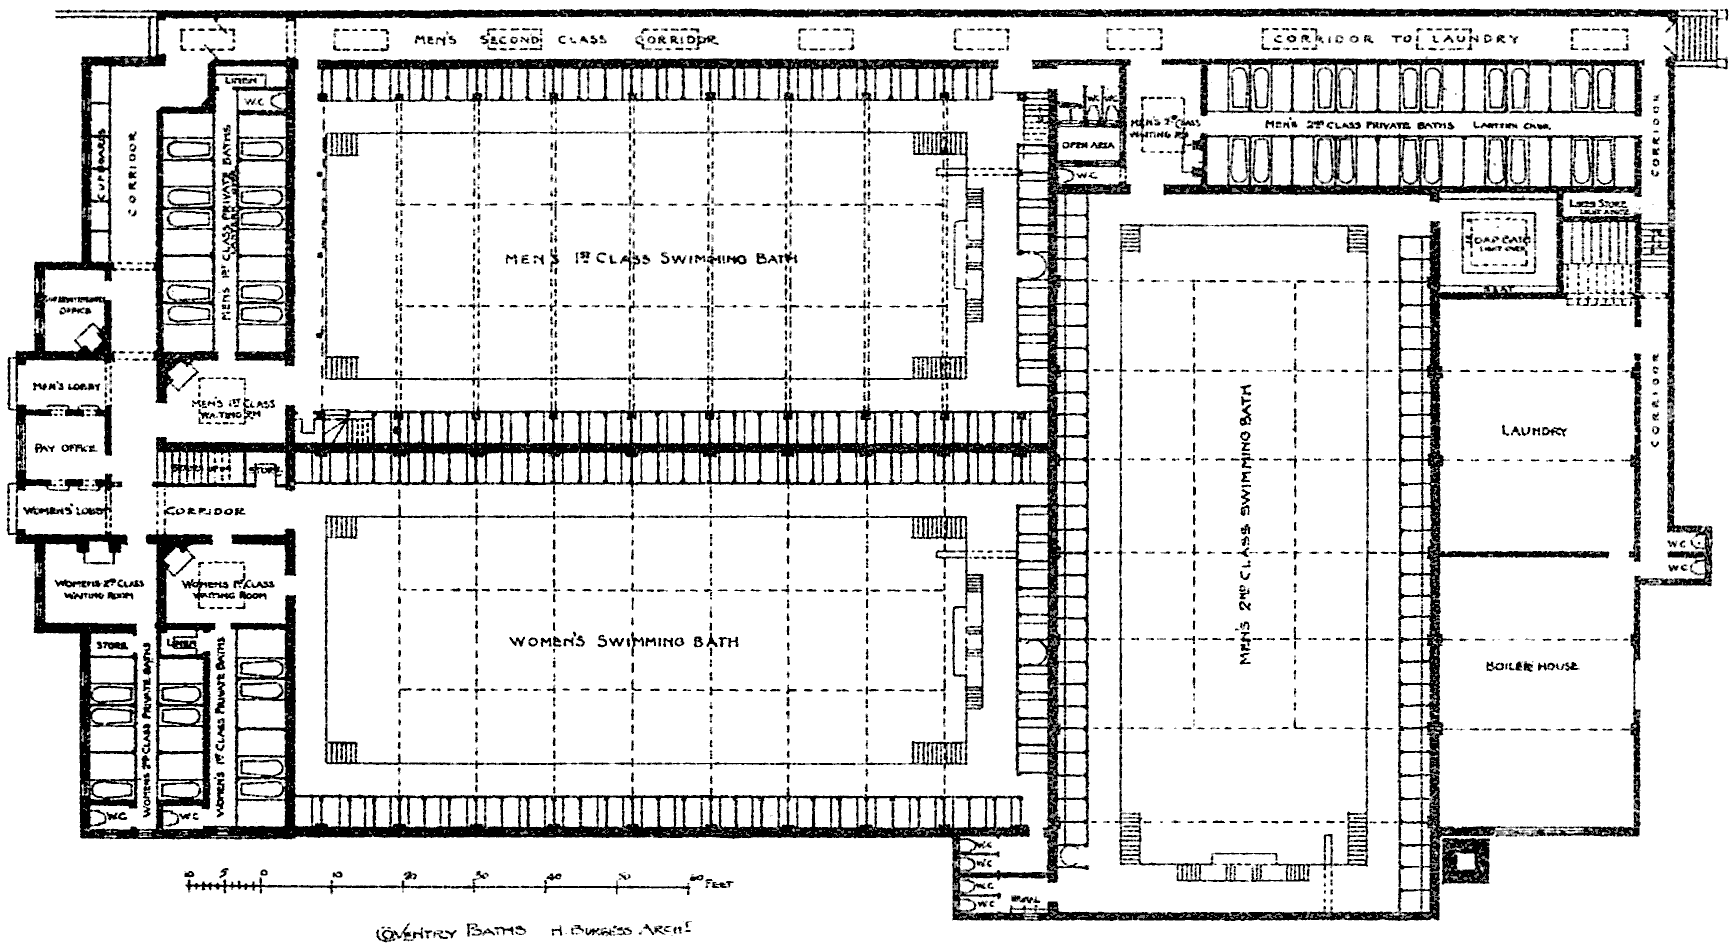 Plan of Coventry's Public Baths 1896